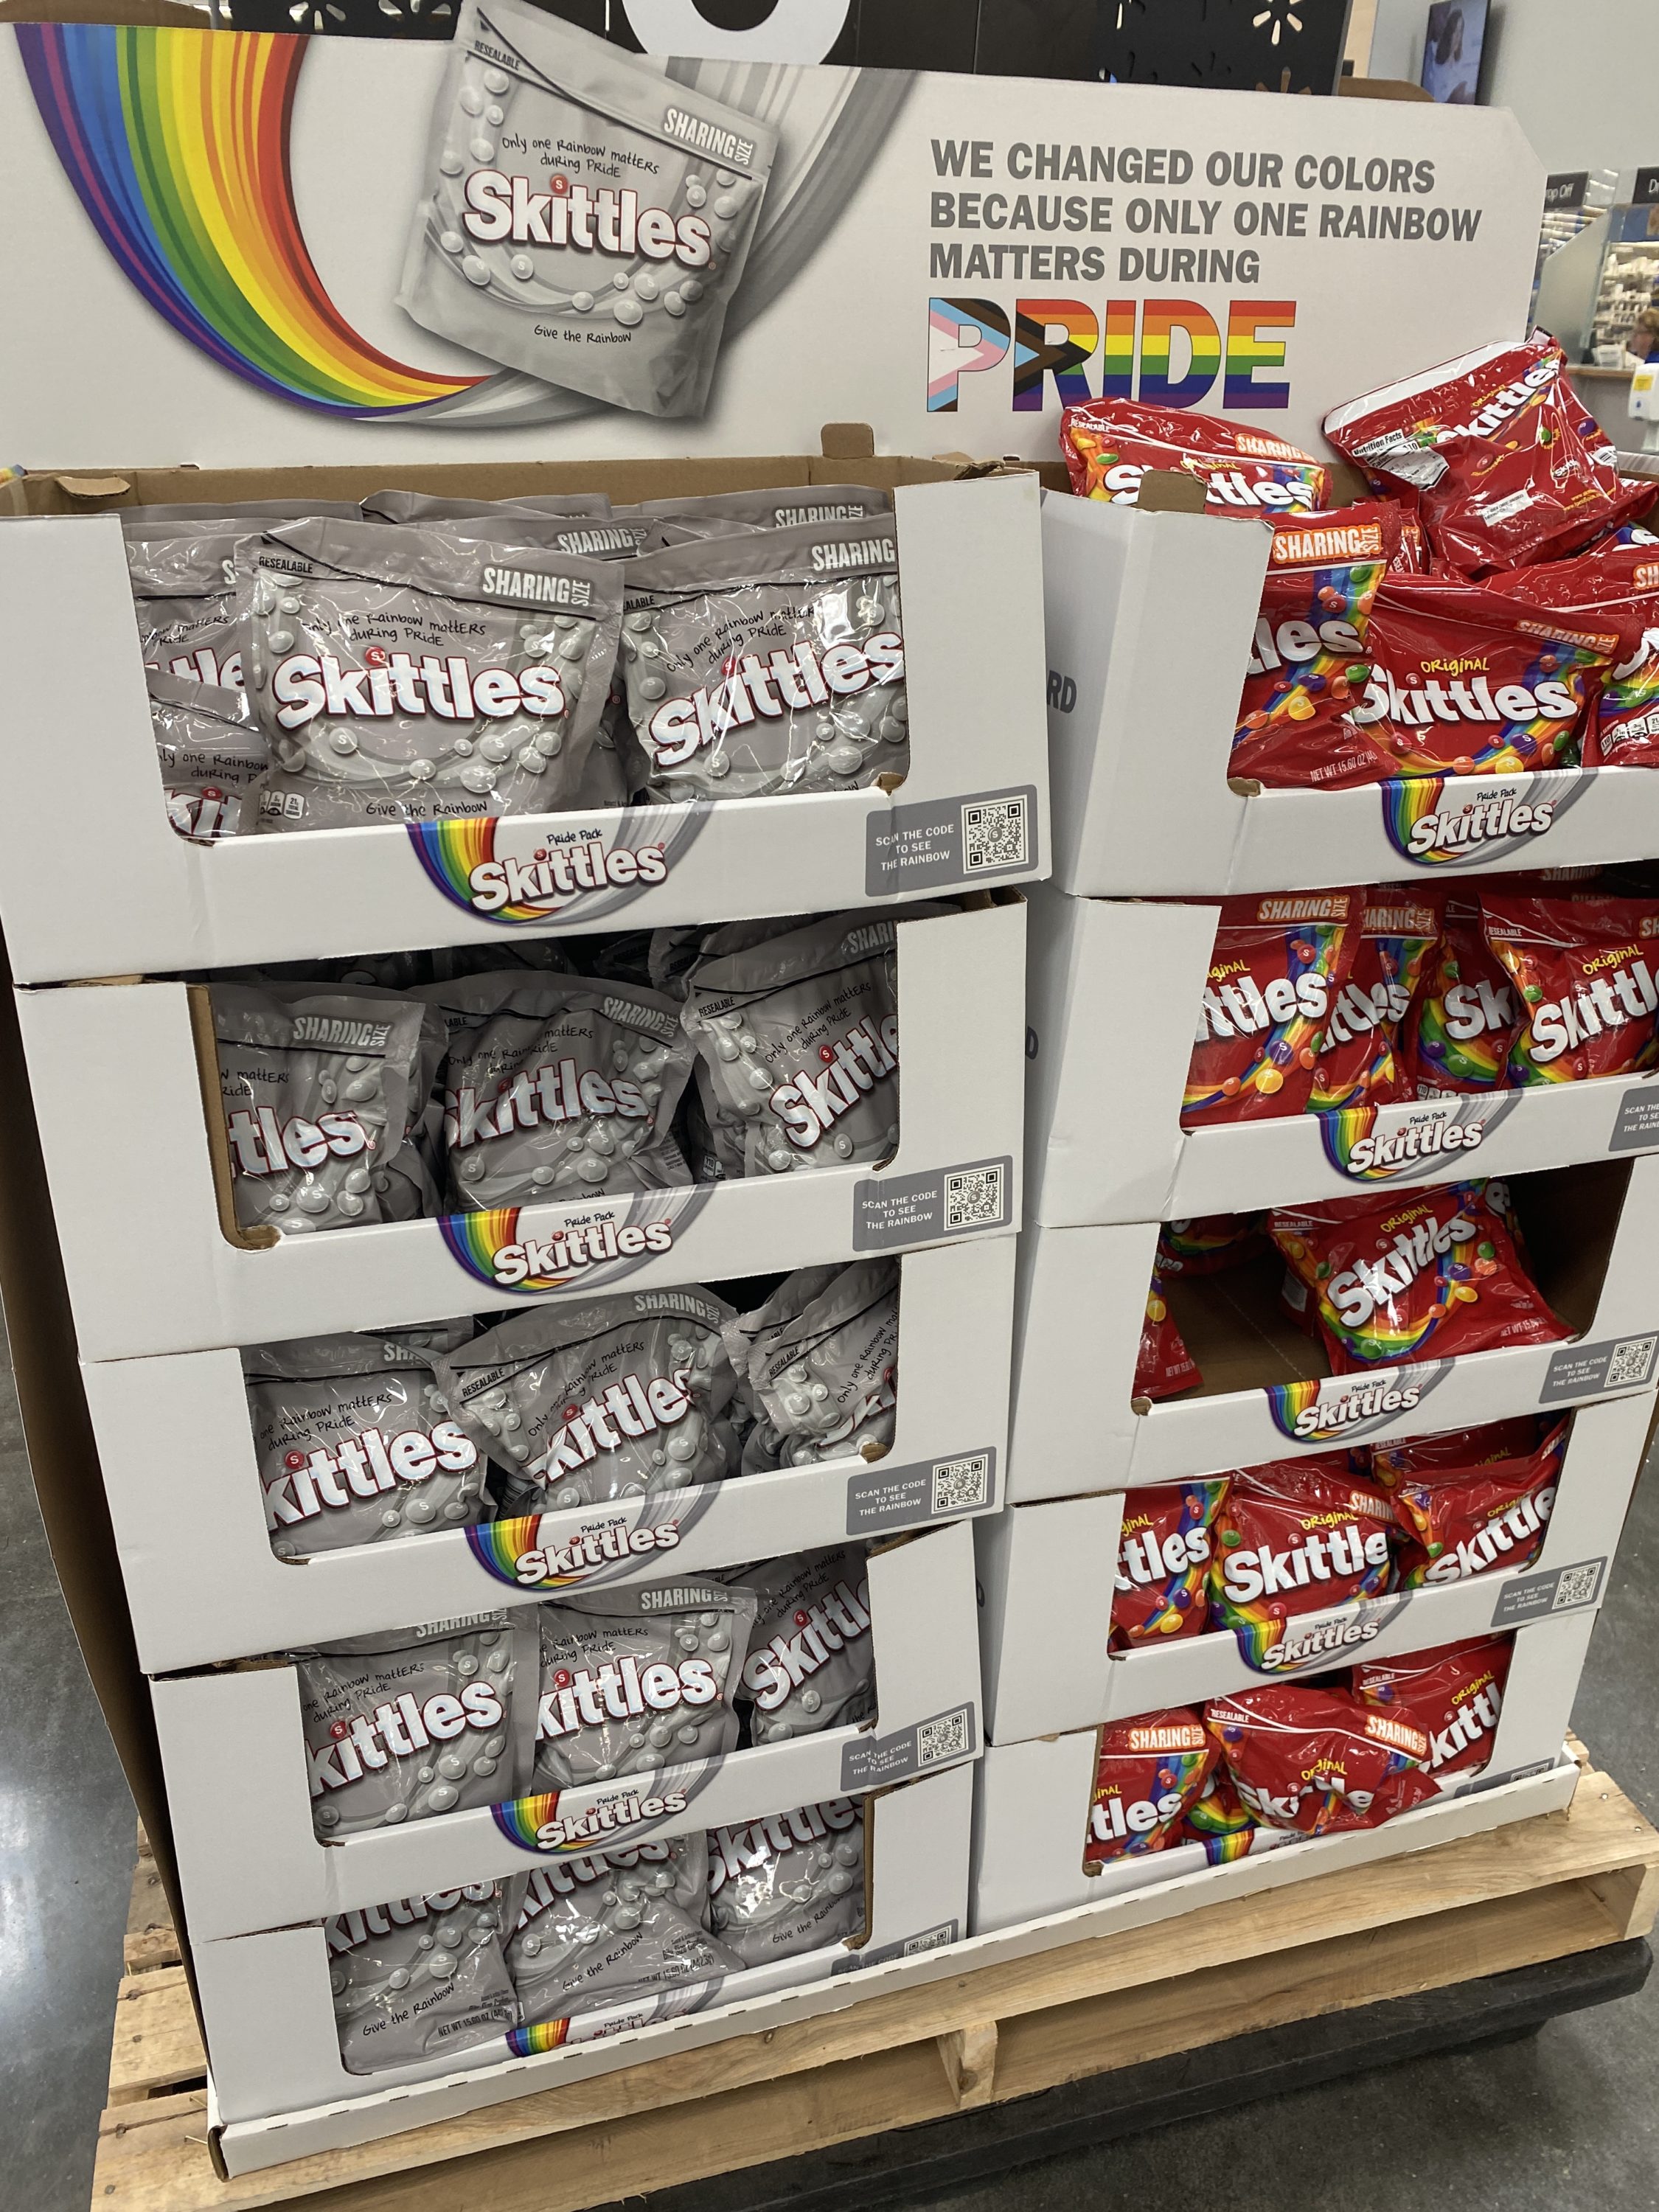 Skittles you are wrong the only rainbow that matters is God’s Rainbow which you claim Is the Pride rainbow in this display. #Skittles #Rainbow 